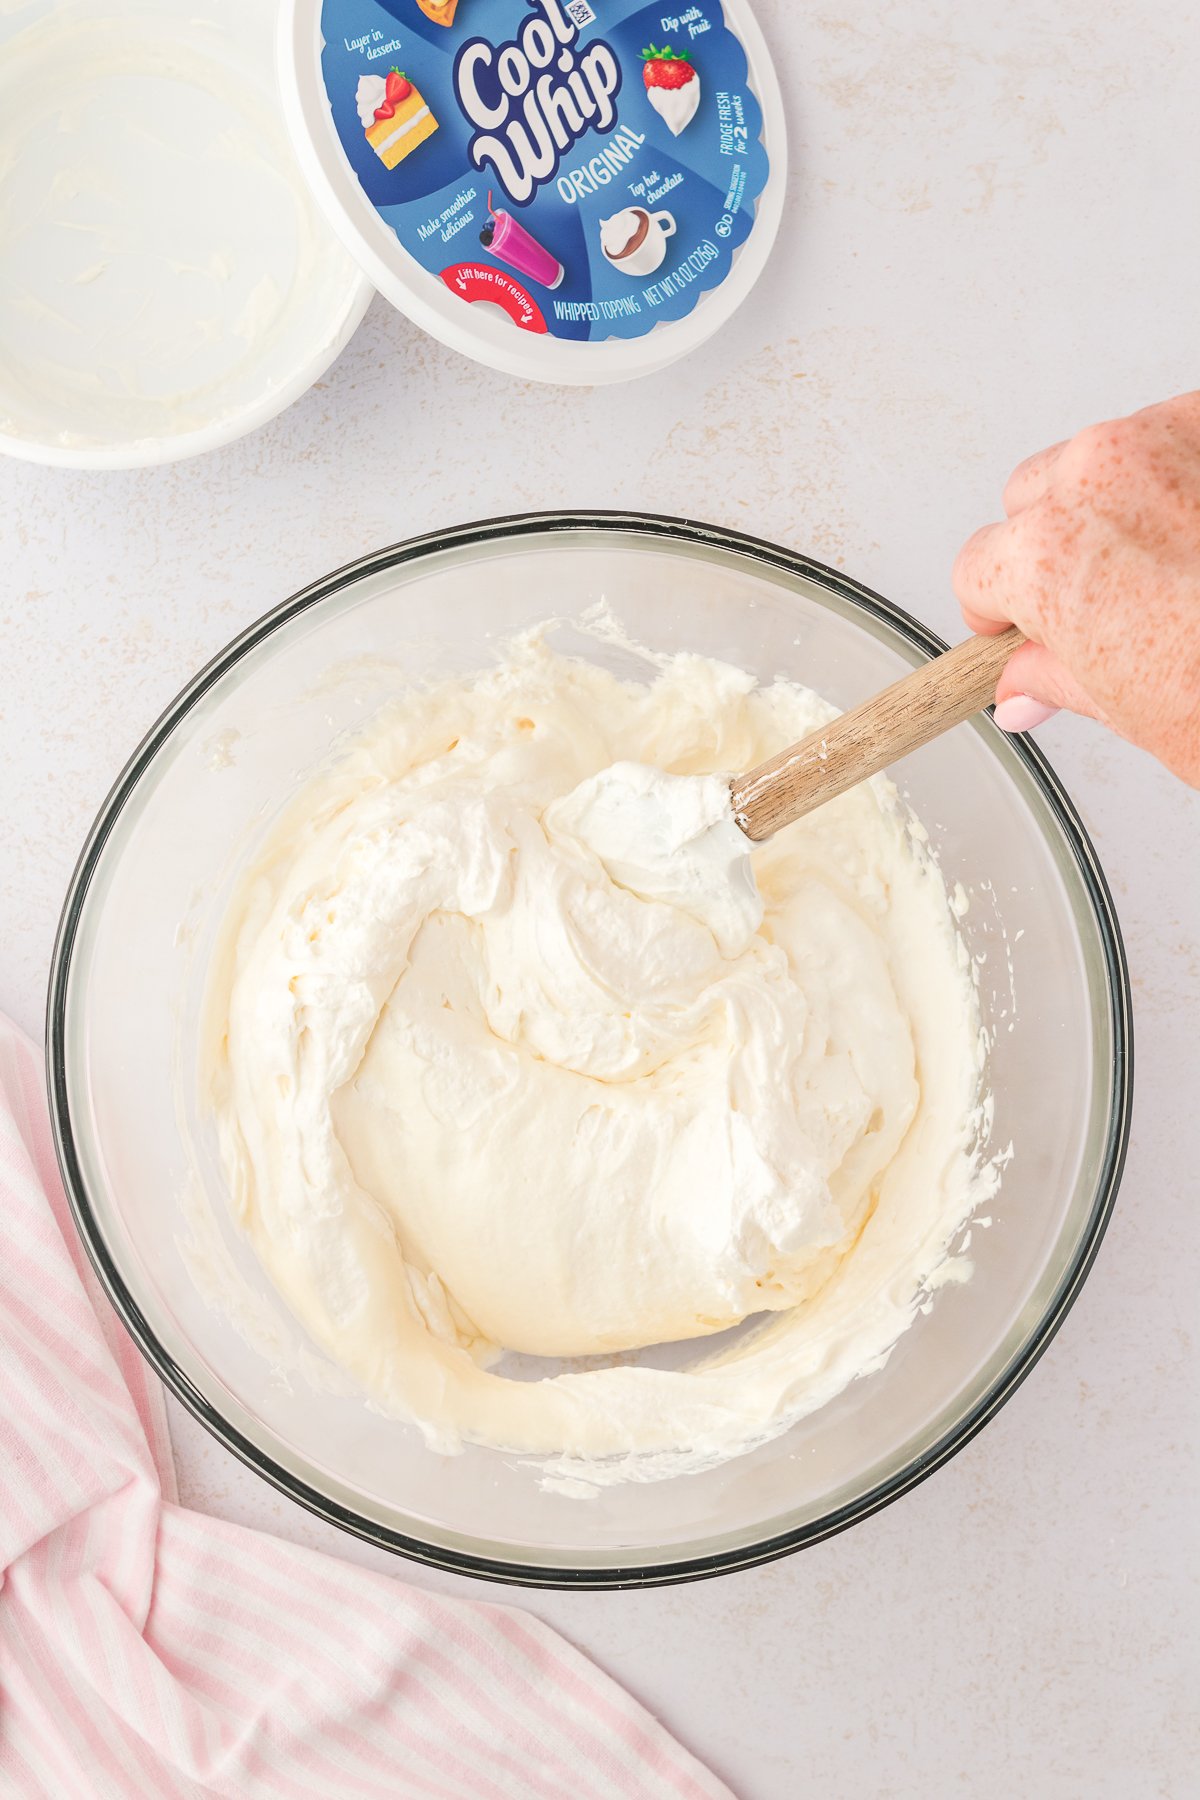 cream cheese mixture in a glass bowl being mixed with a spatula, beside a pink and white striped kitchen towel and an open container of cool whip